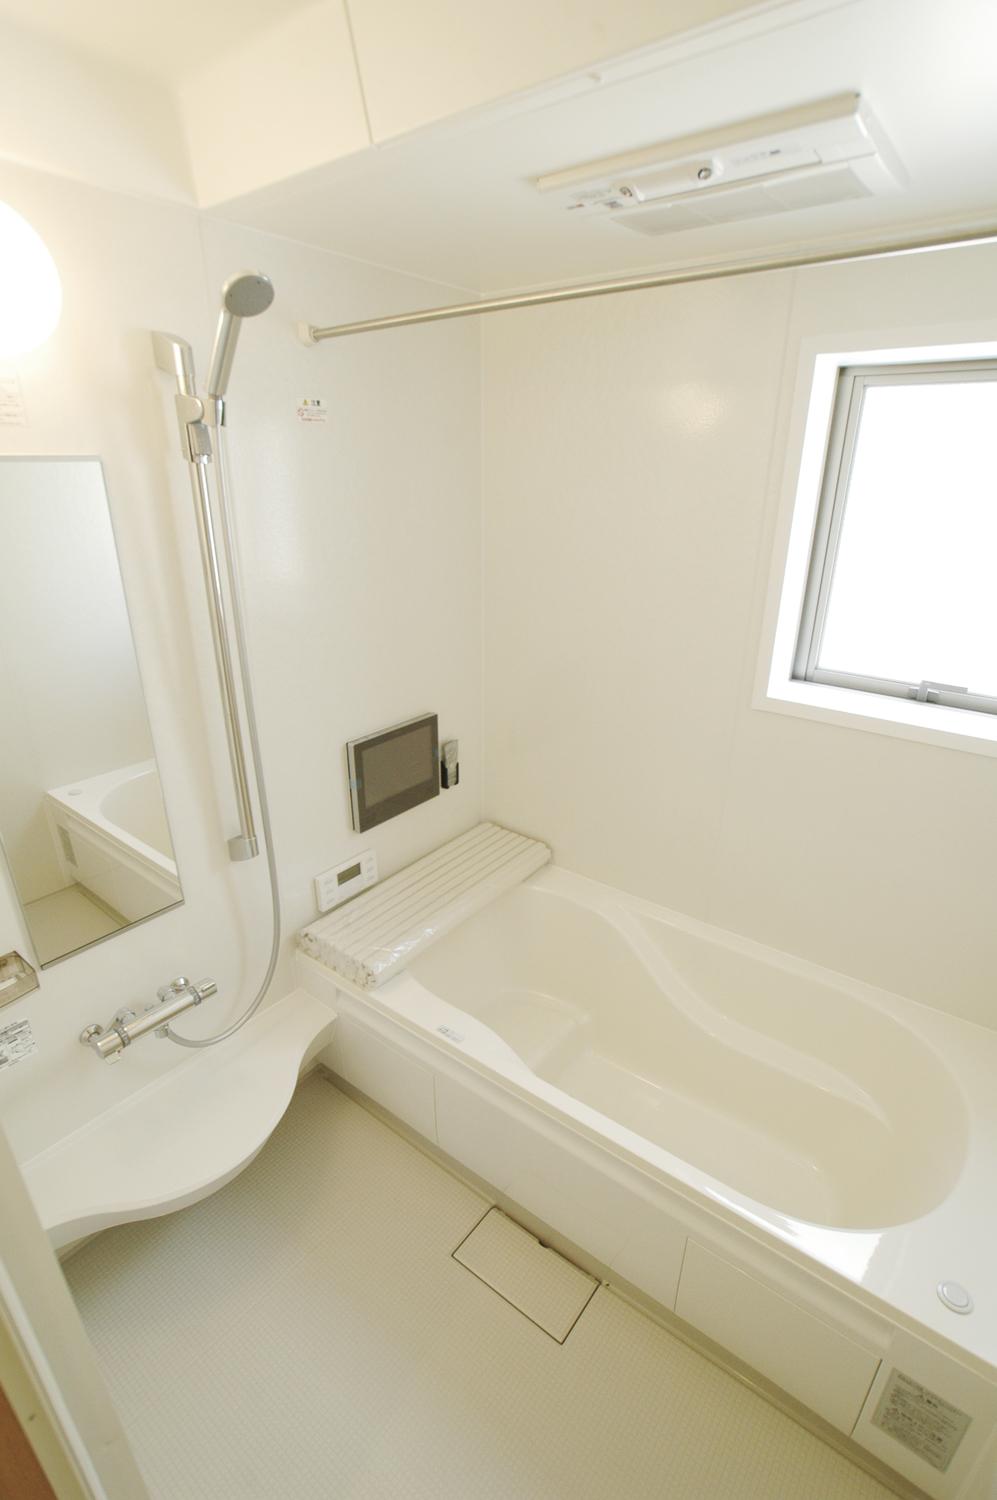 Bathroom. Bathroom TV, Mist is with a sauna. You can enjoy a relaxing bath while watching TV.